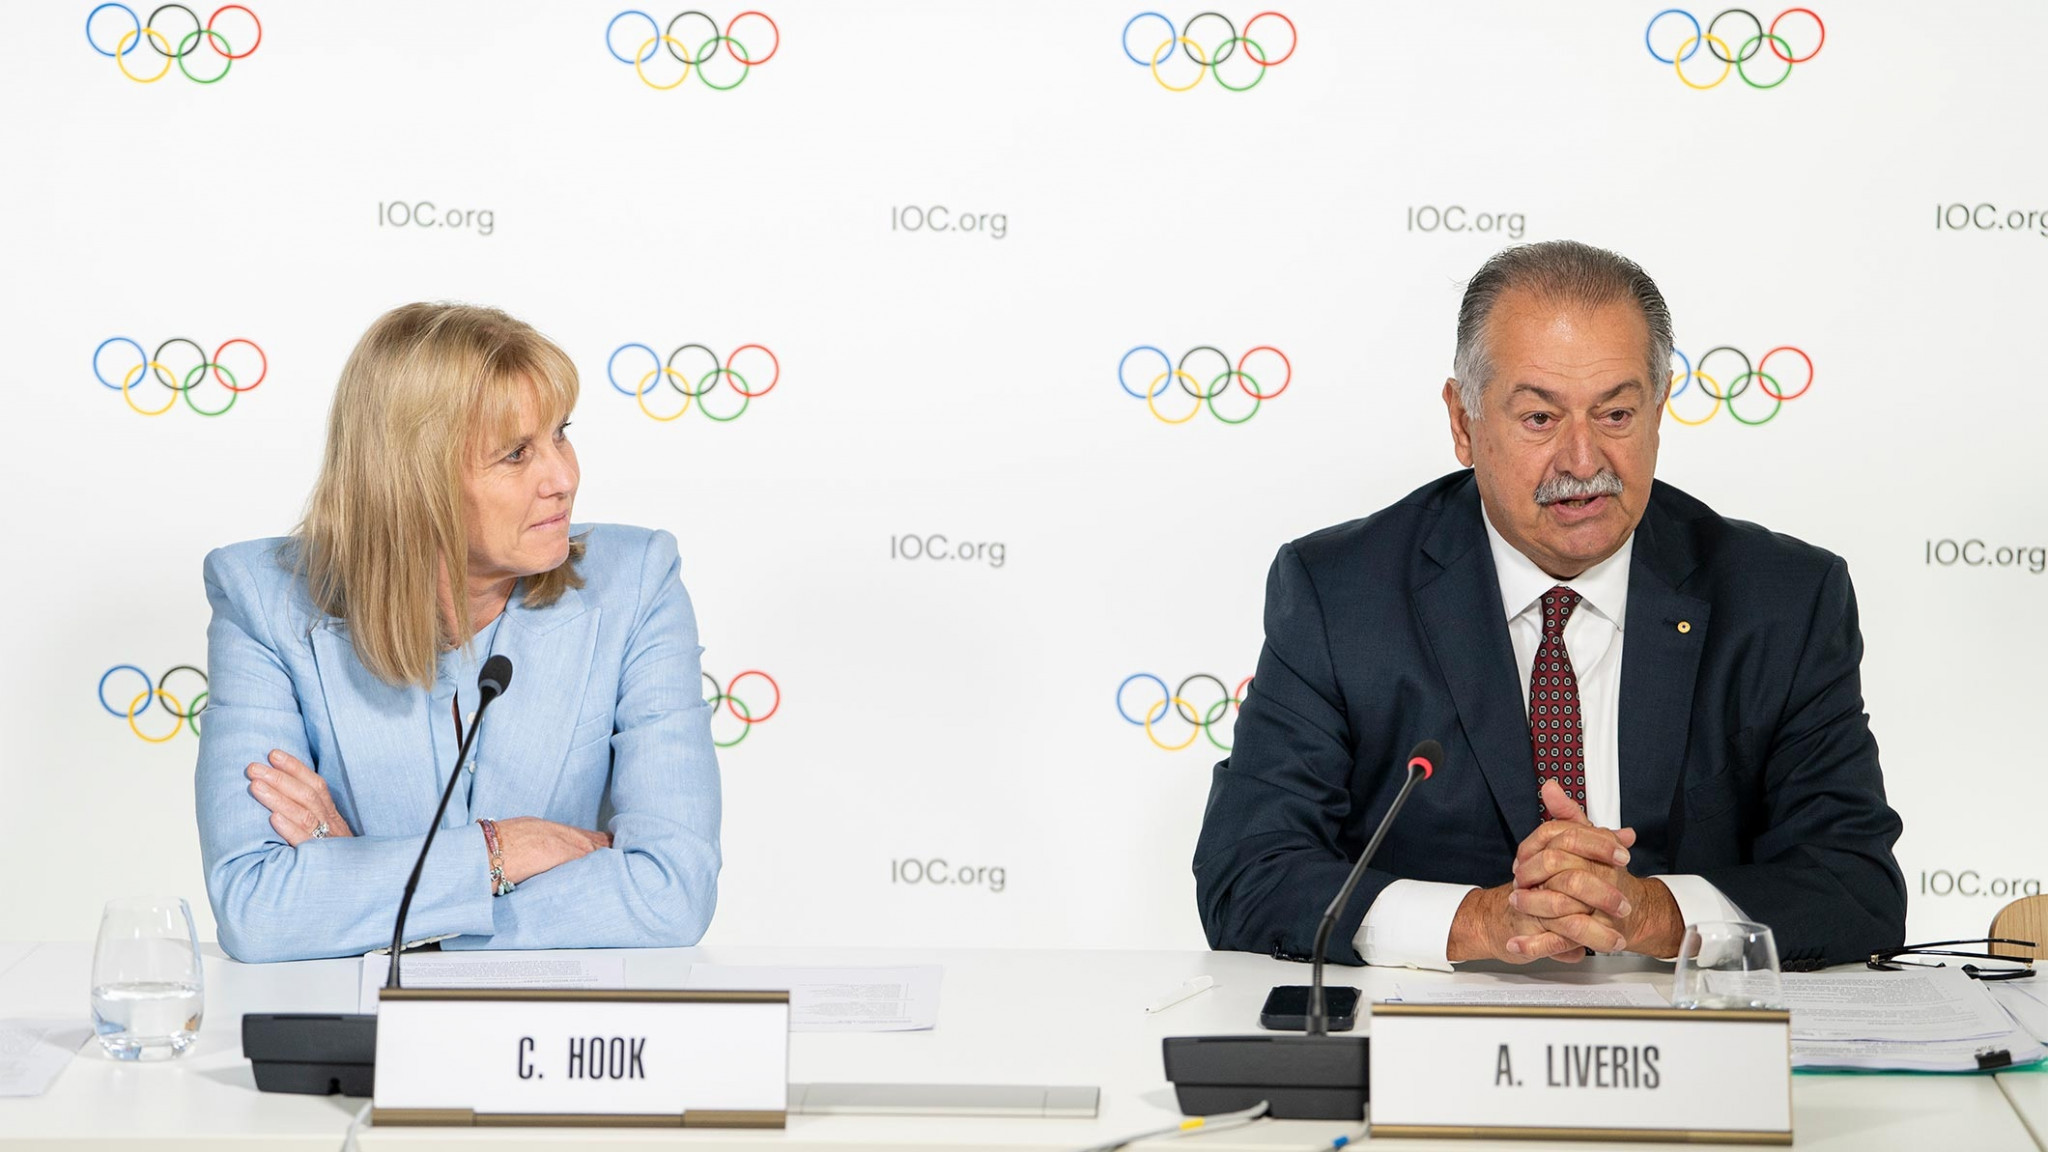 IOC Coordination Commission chair Kirsty Coventry and Brisbane 2032 President Andrew Liveris are pleased with preparations for the Games in nine years' time ©IOC